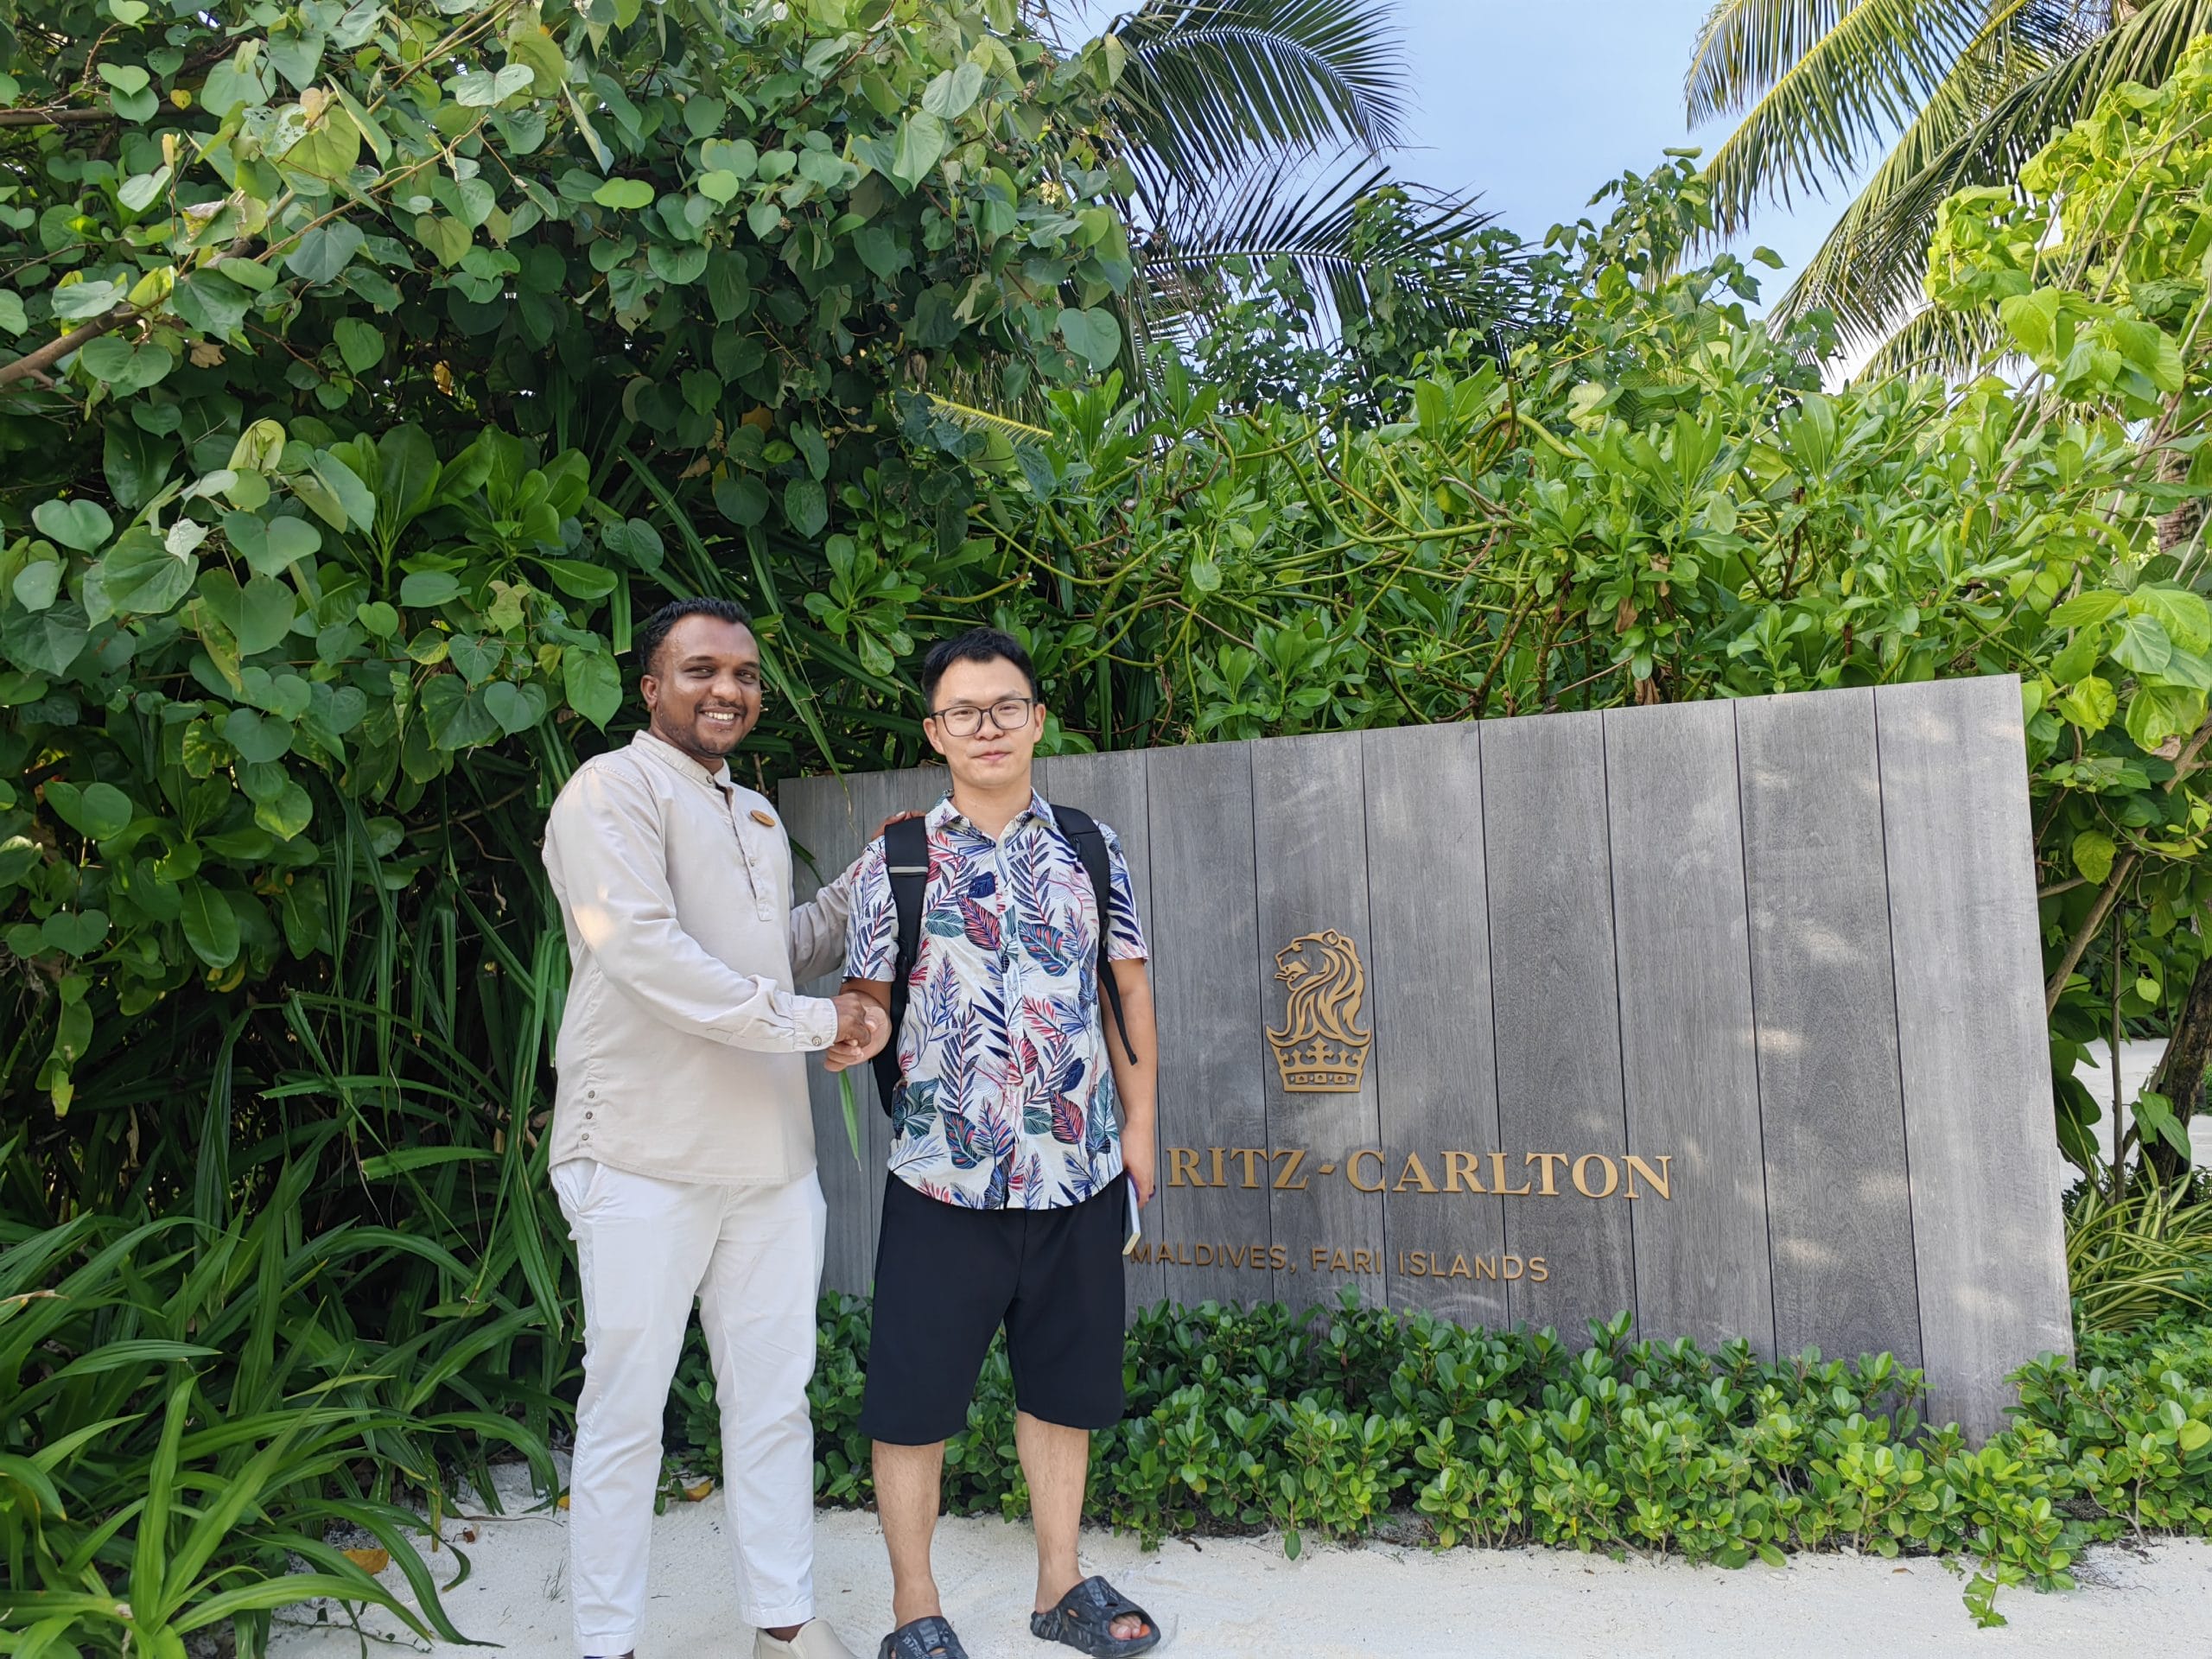 Unforgettable Meeting with The Ritz-Carlton Maldives